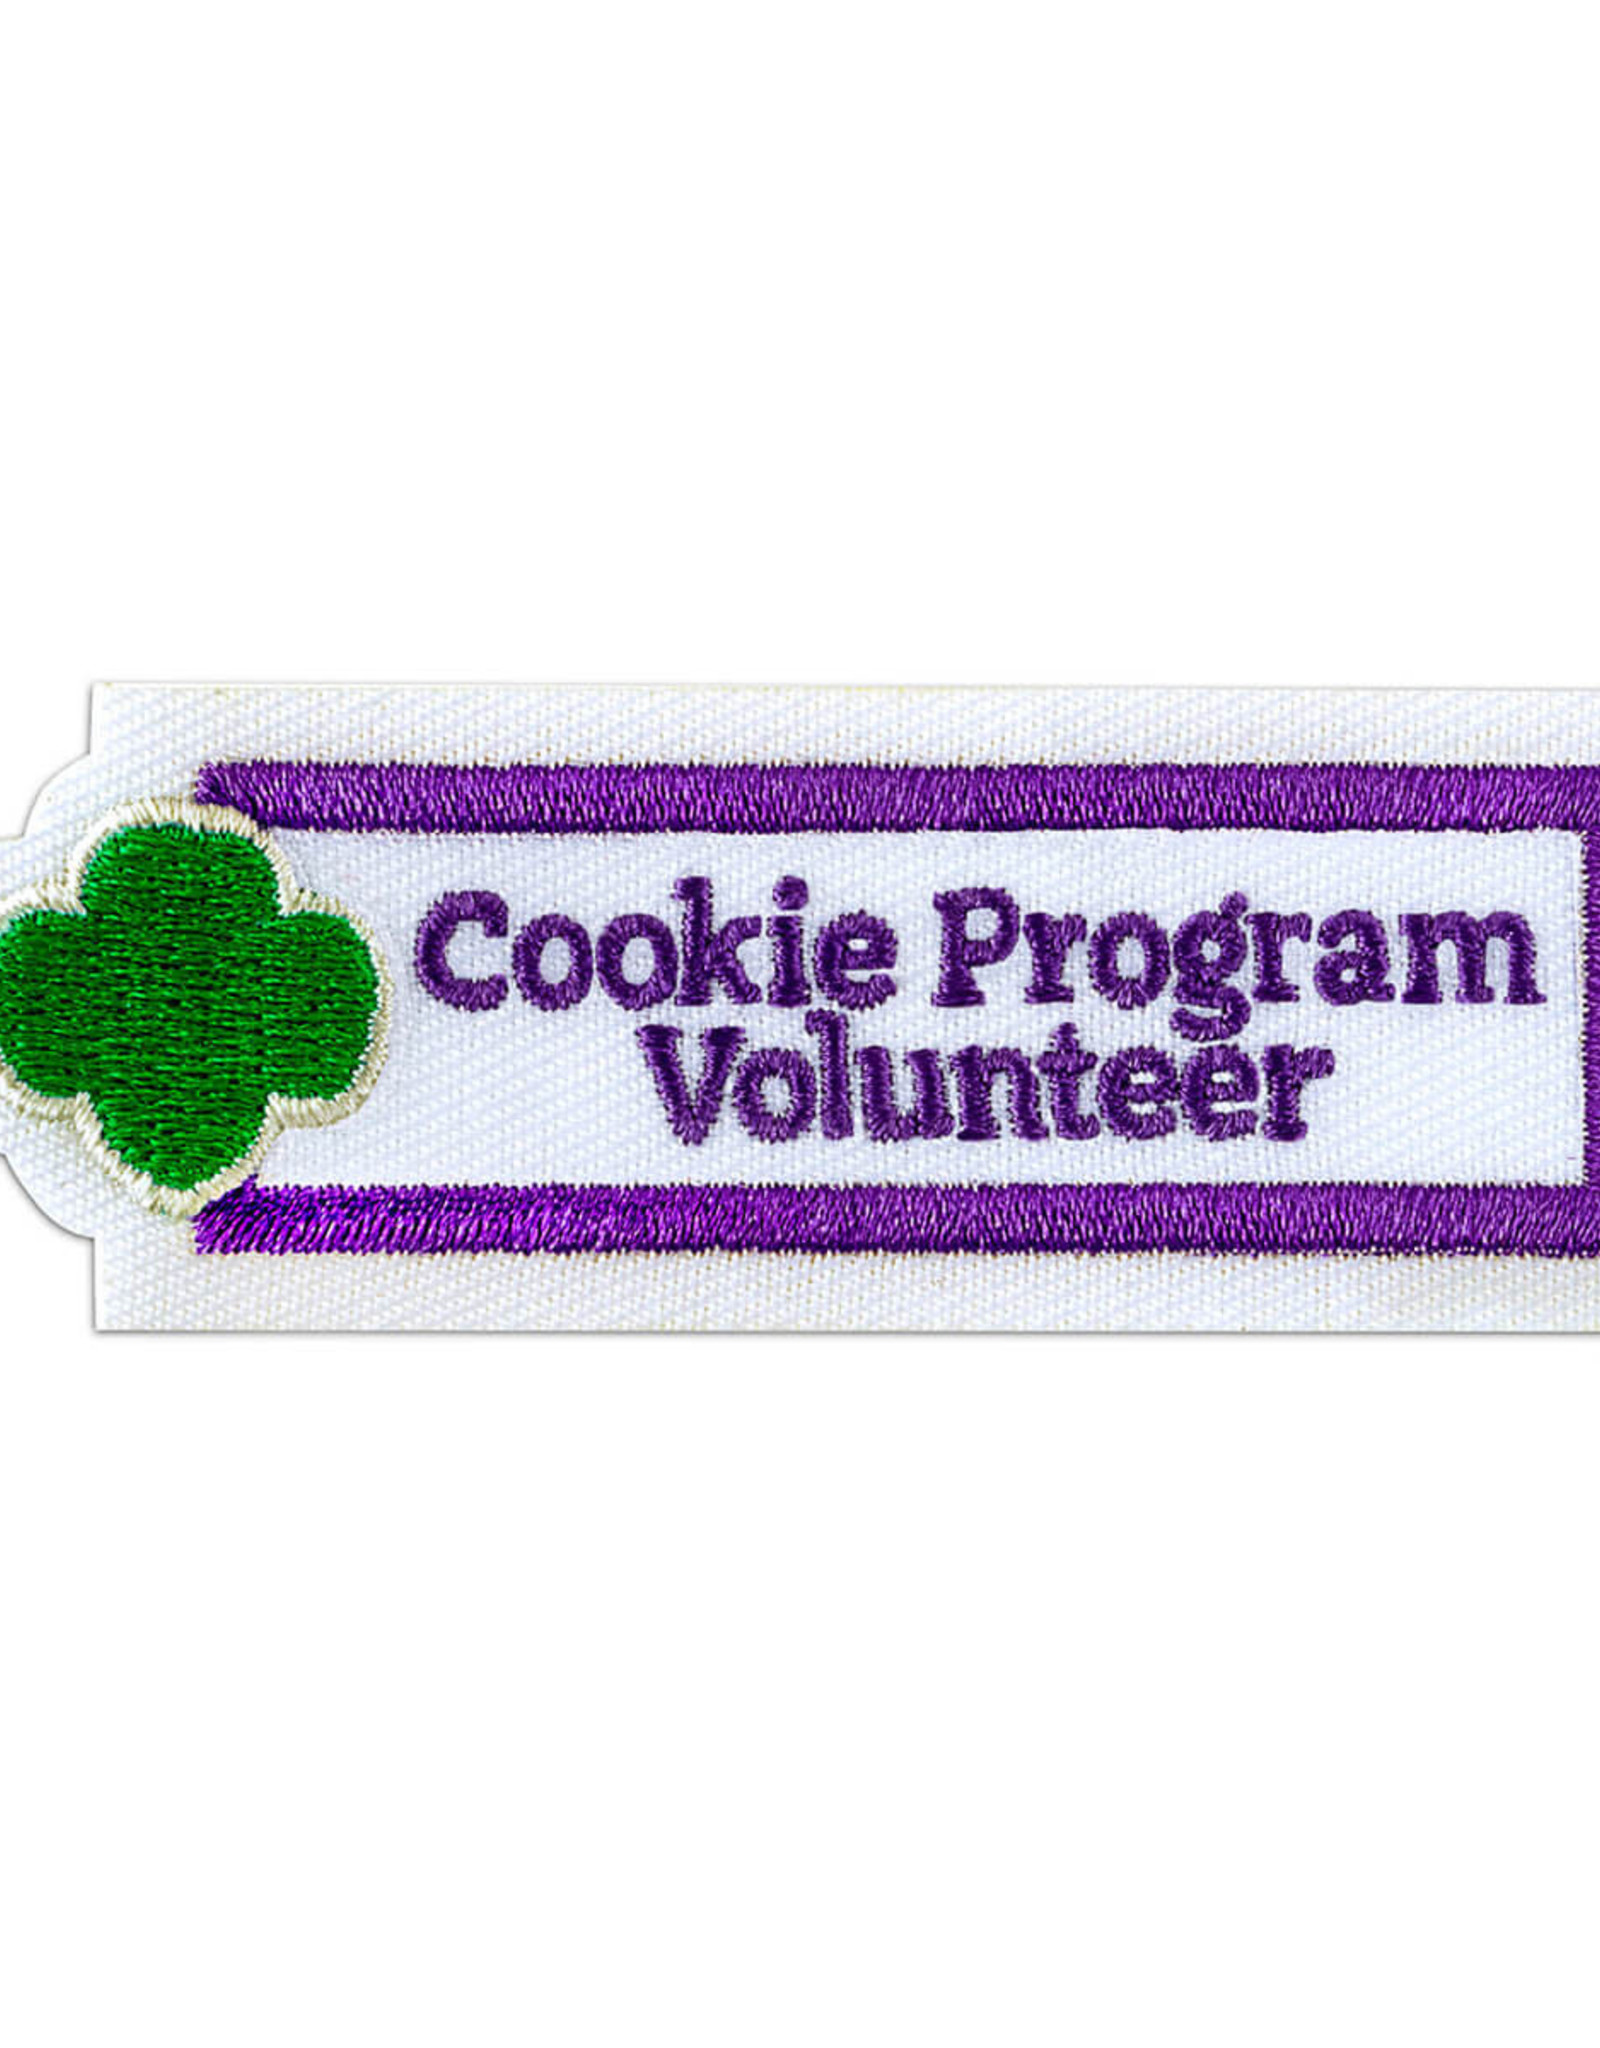 GIRL SCOUTS OF THE USA Cookie Program Volunteer Adult Achievement Patch